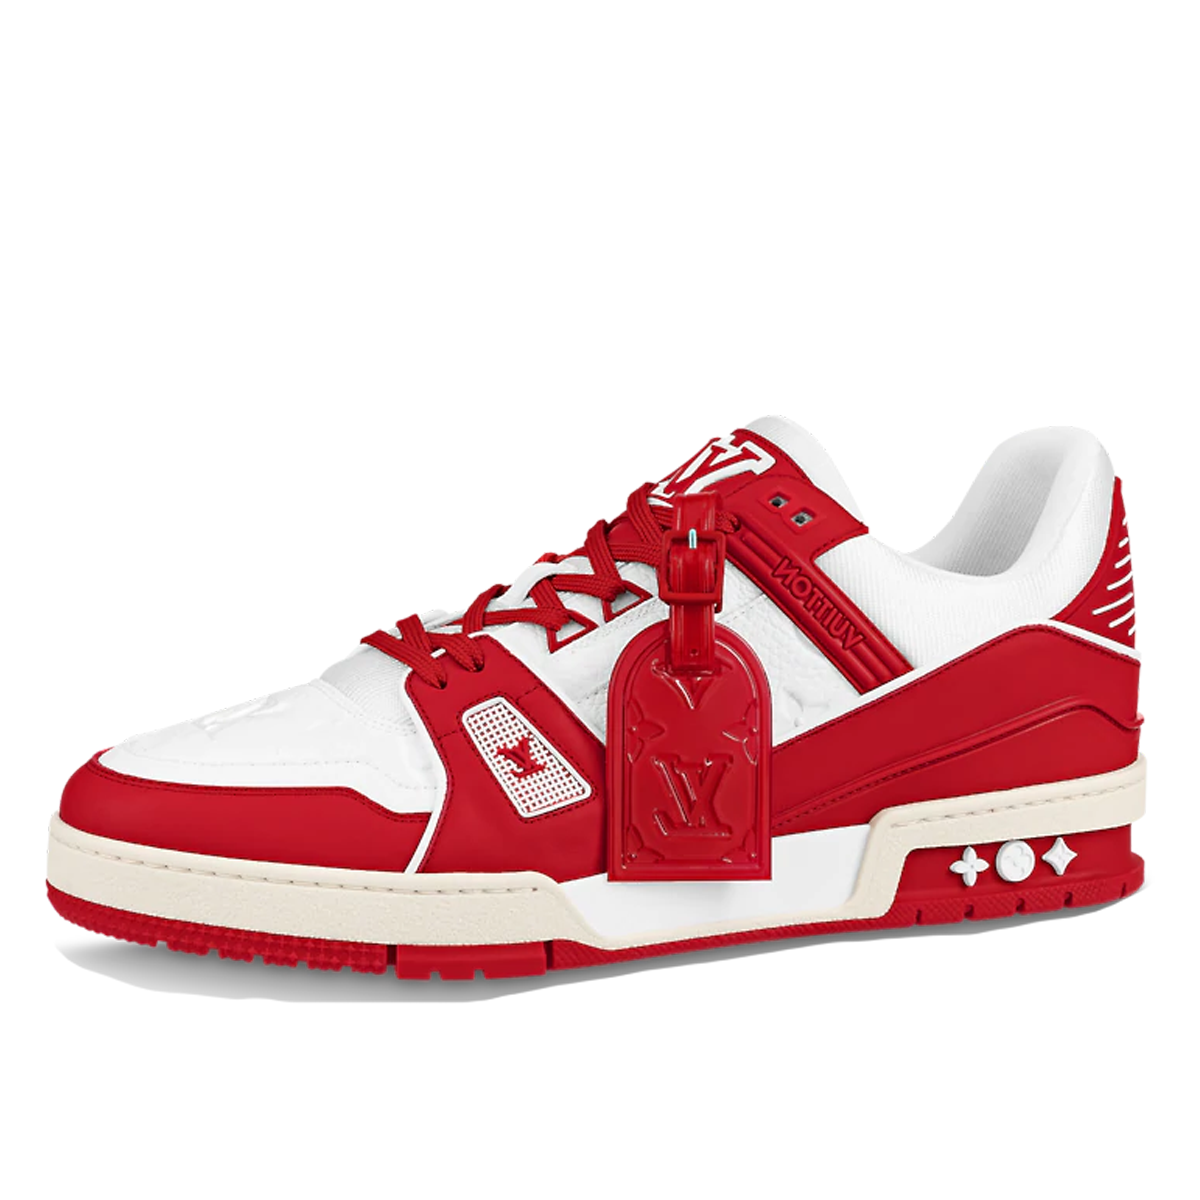 LOUIS VUITTON BY VIRGIL ABLOH RED PRODUCT RED SNEAKERS 1A8PJW SIZE